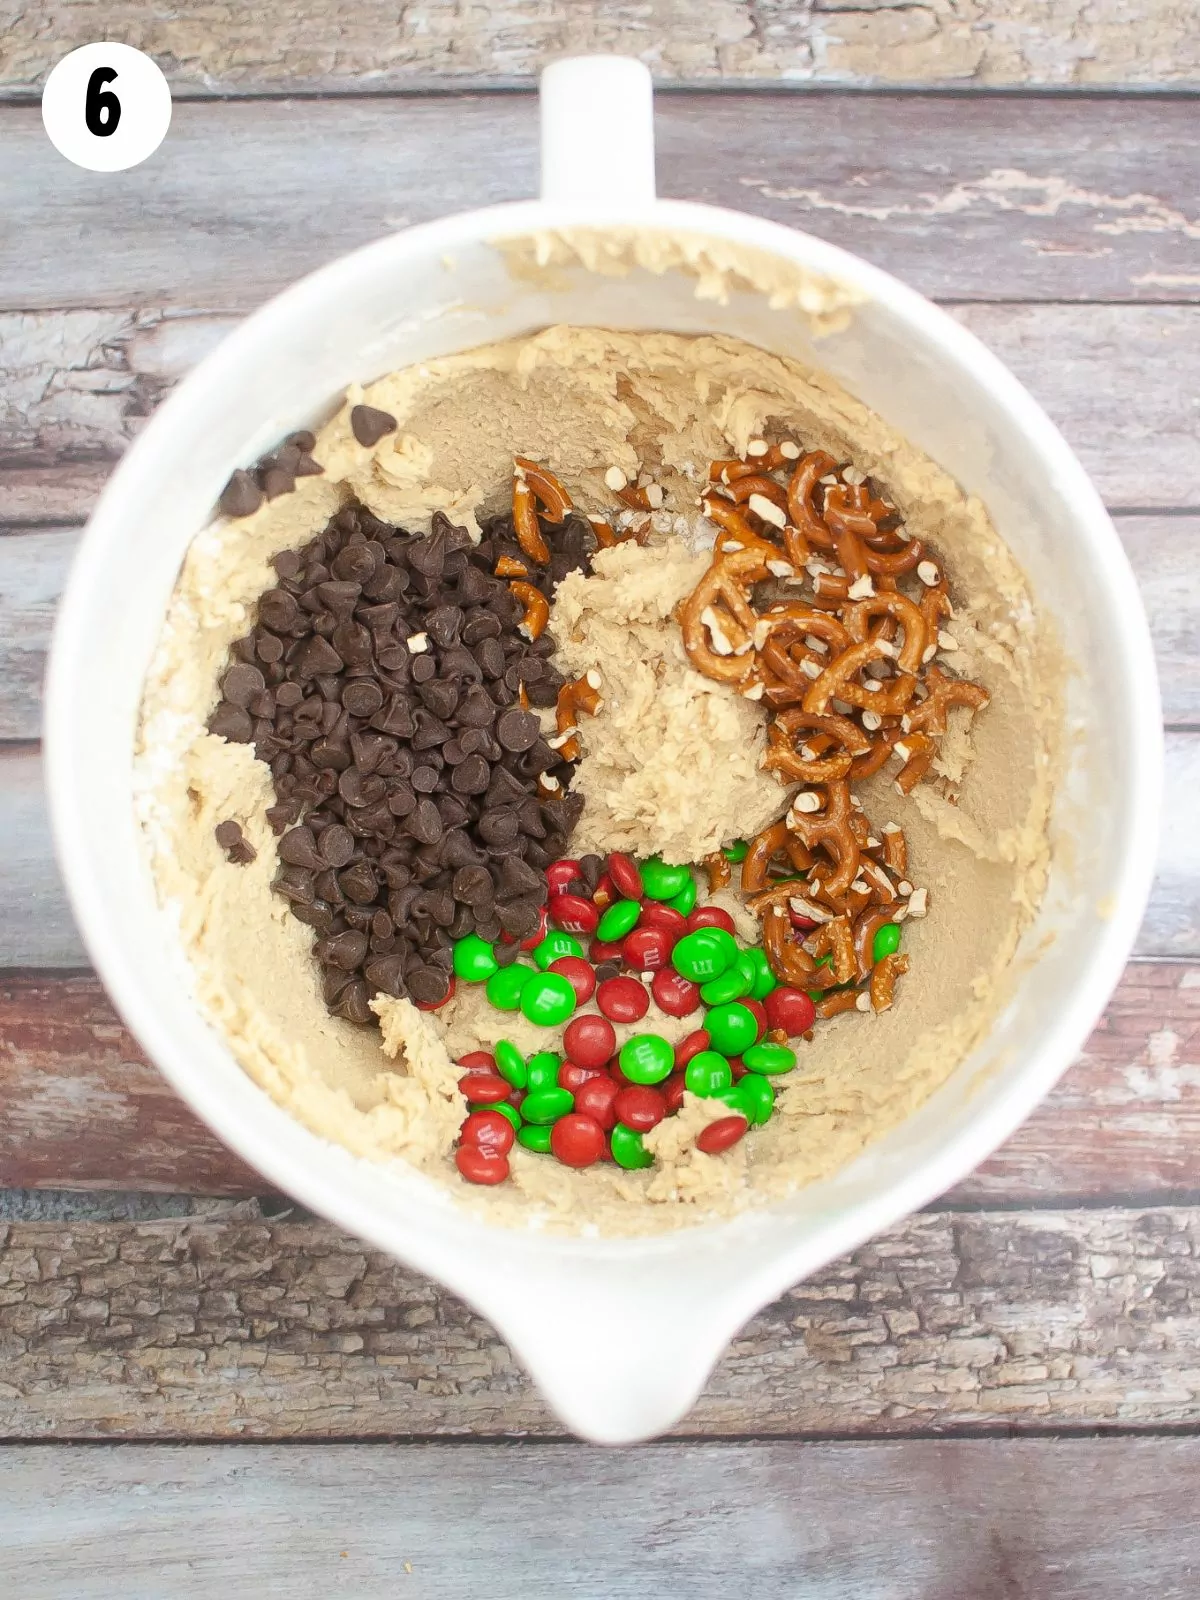 cookie dough with chocolate chips, pretzels and candy pieces for Christmas.